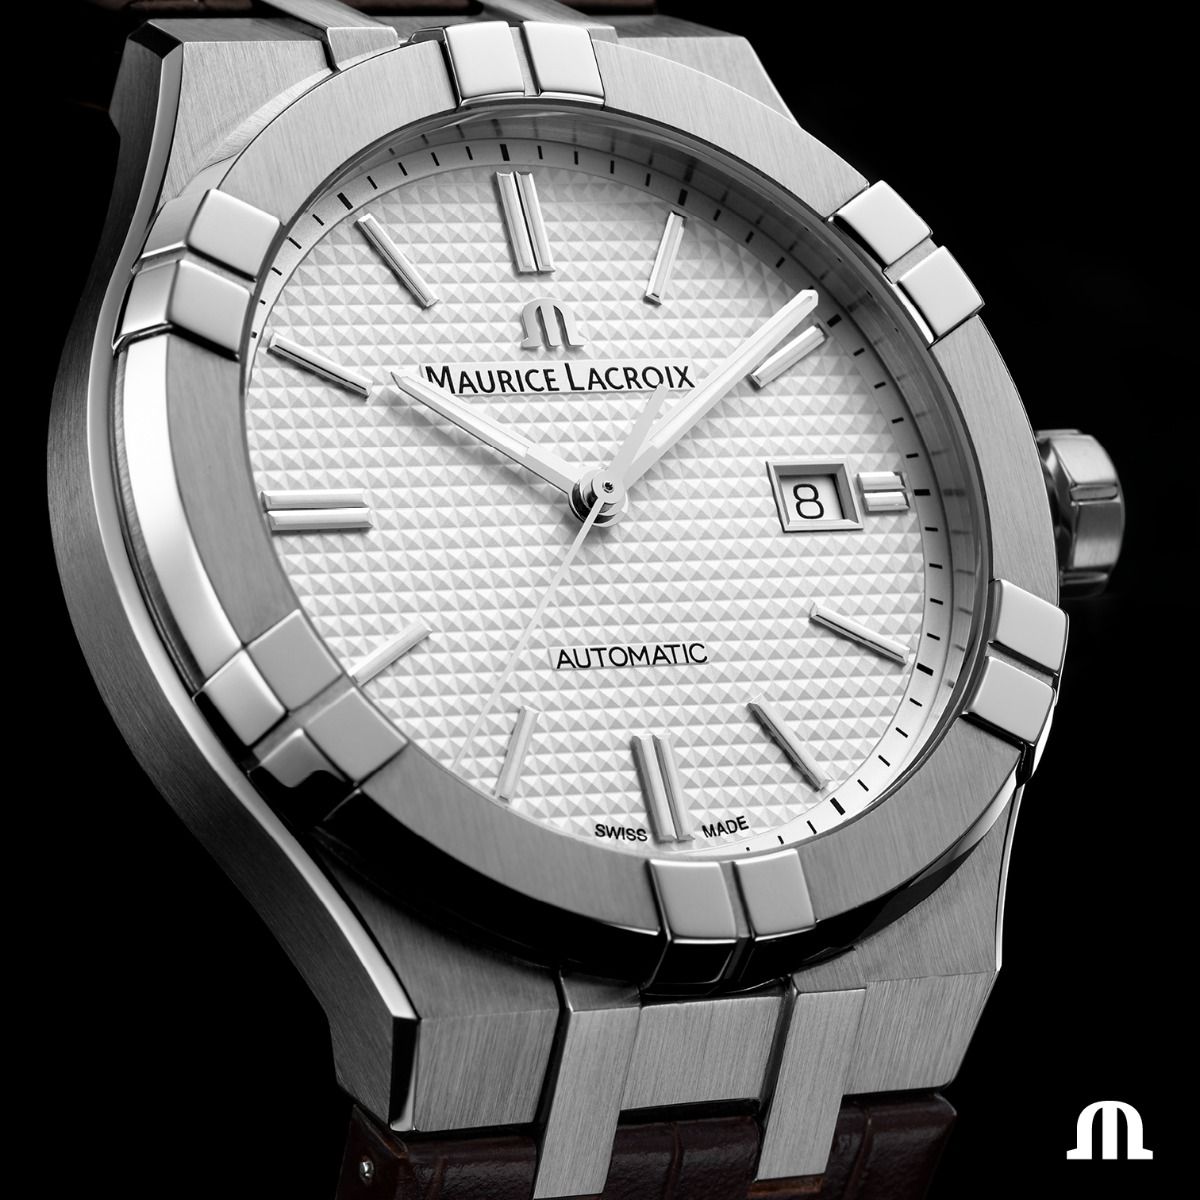 Maurice Lacroix AIKON Automatic 42mm Mens Watch